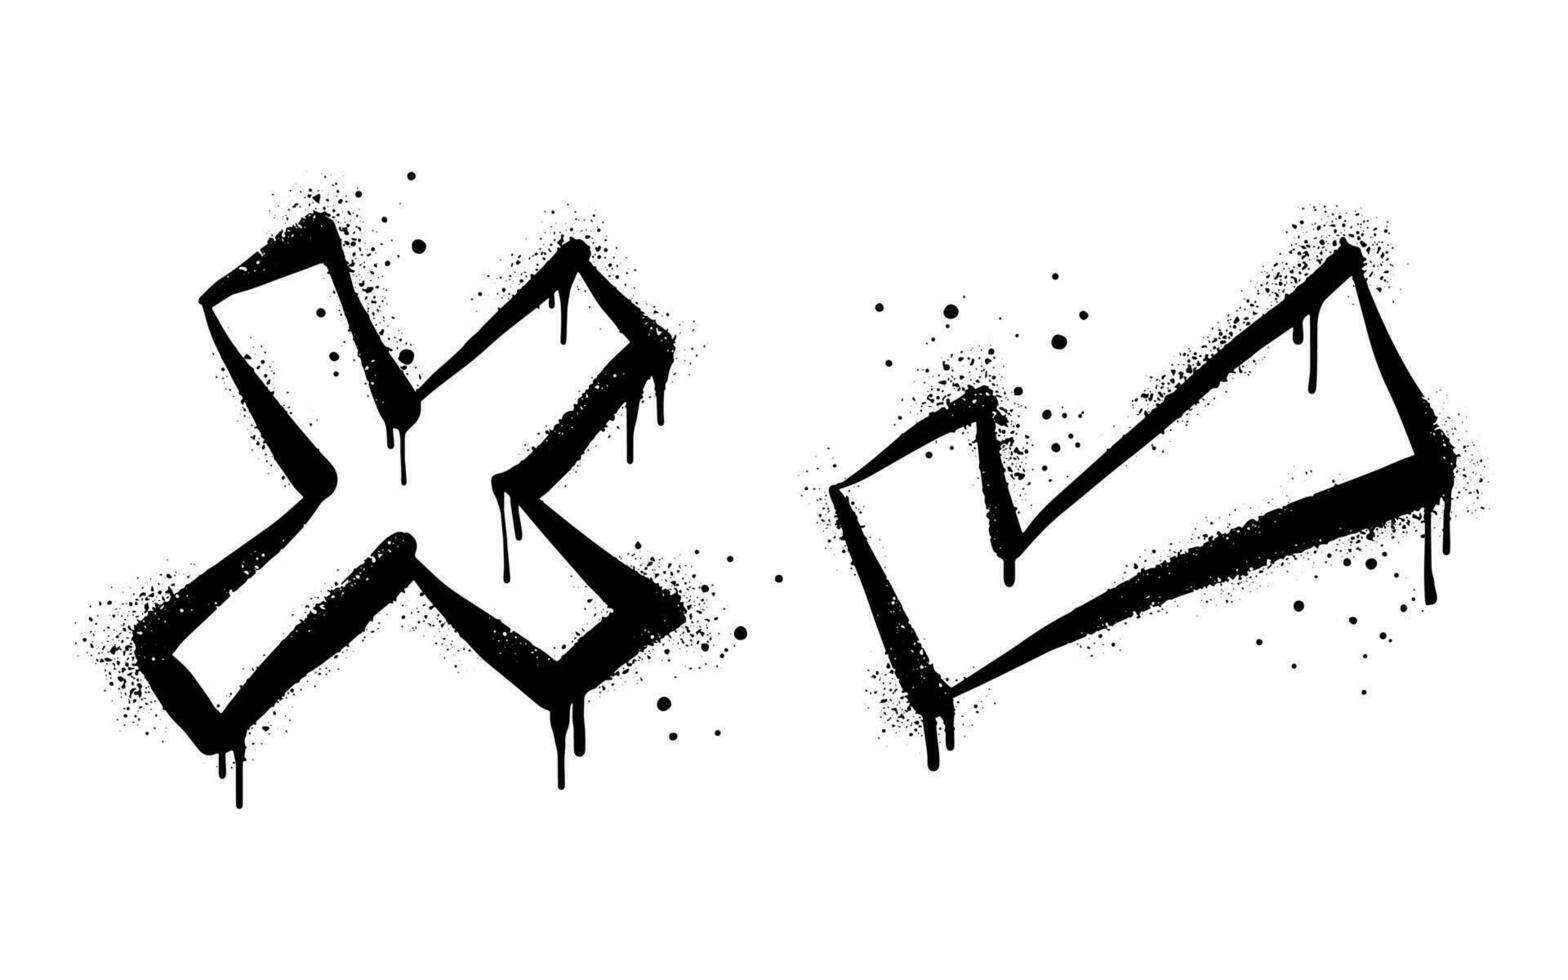 Check sign. Spray painted graffiti check mark in black over white. isolated on white background. vector illustration